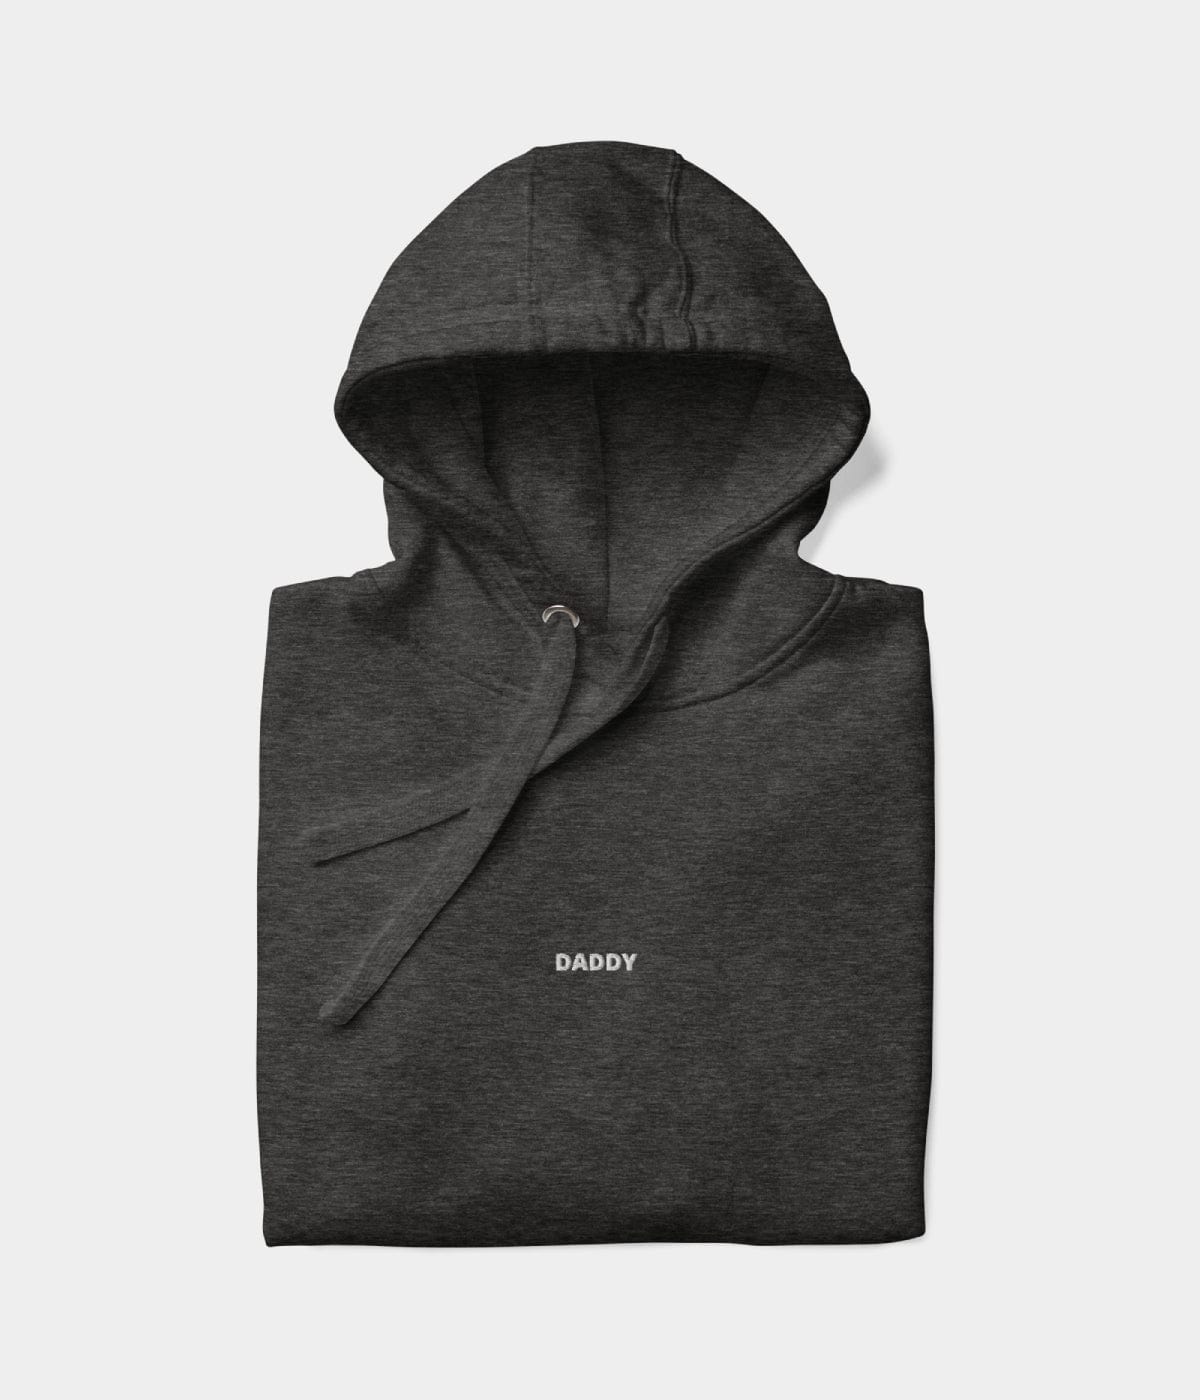 DADDY HOODIE.